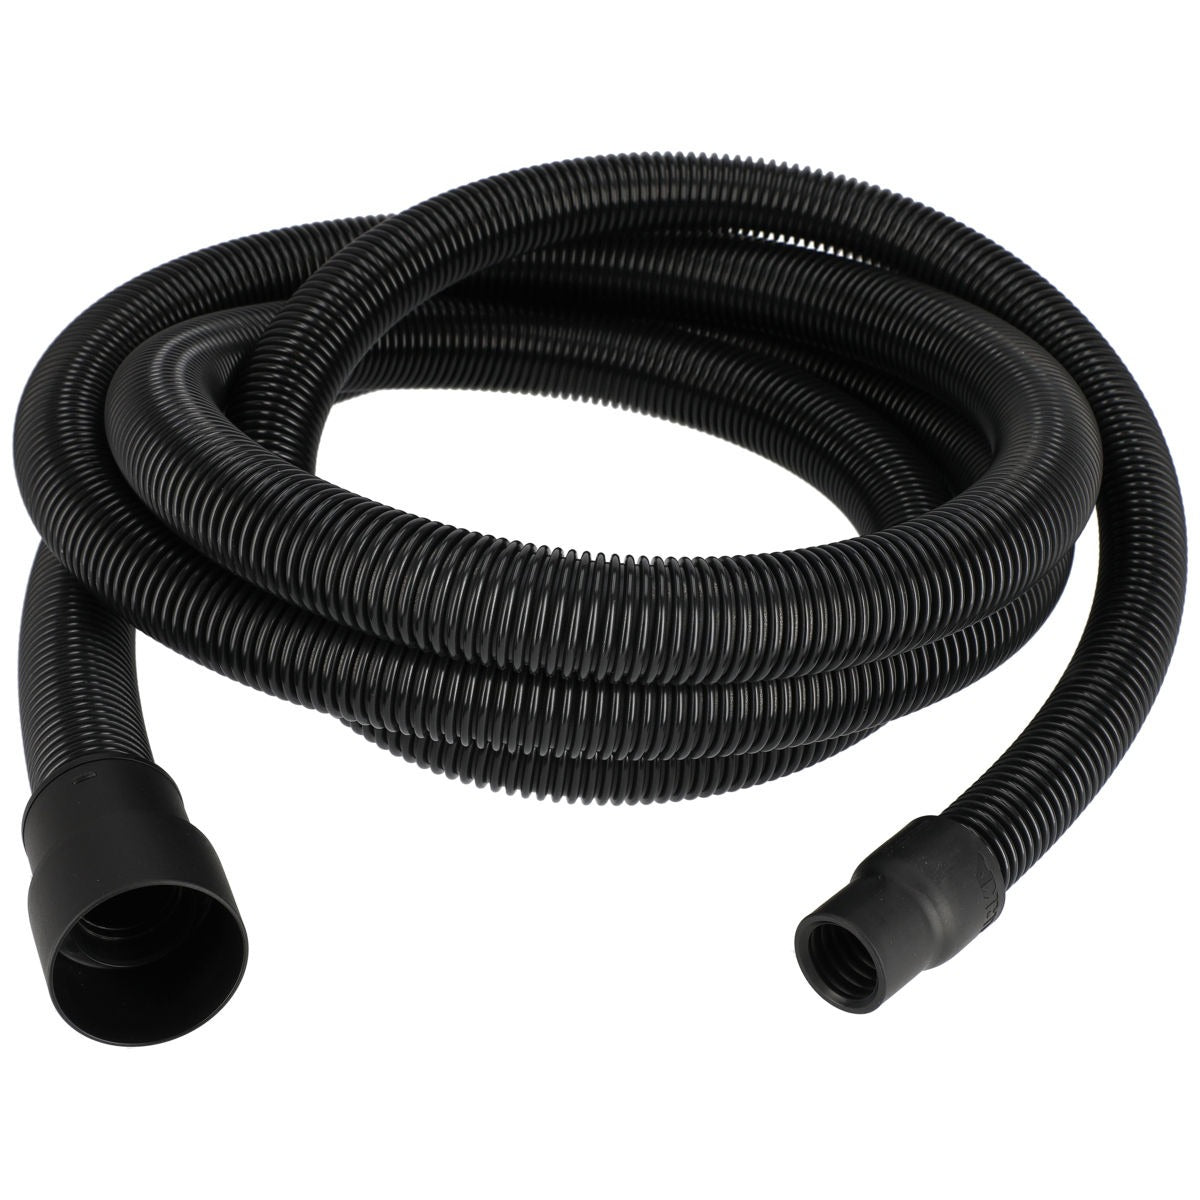 Hose and Connector Ø 27 mm / 32 mm Length 4m